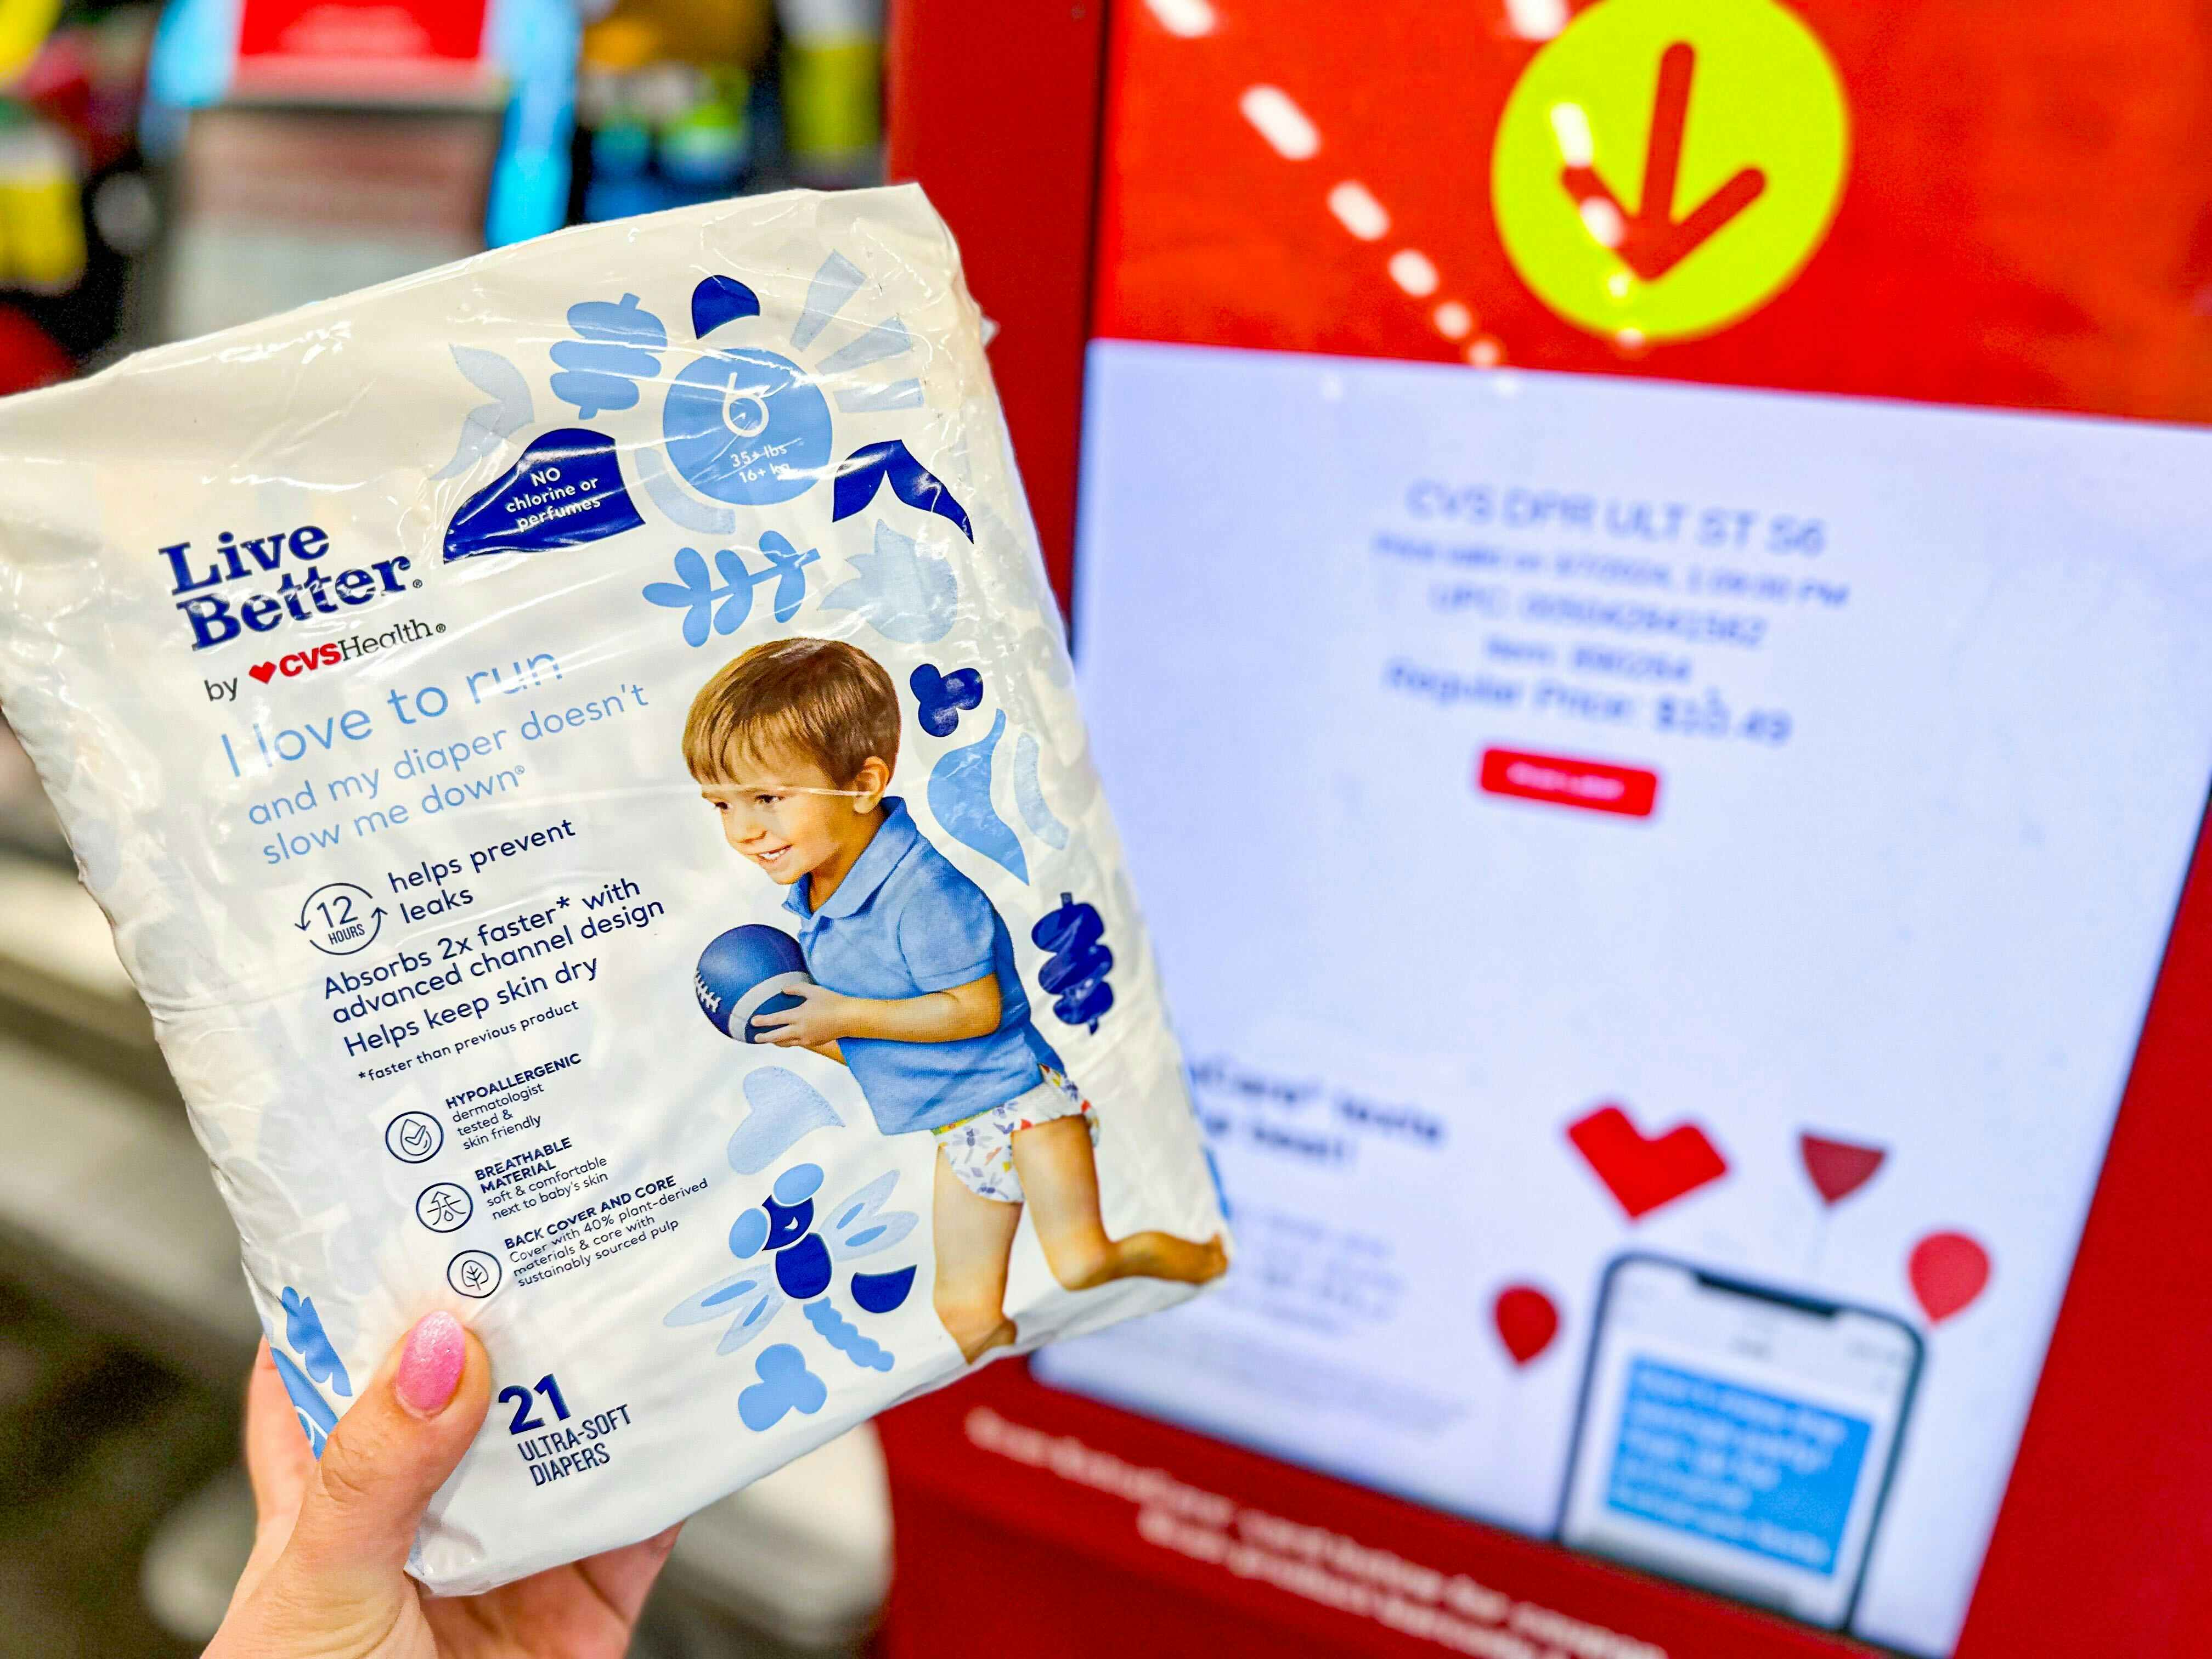 Keep an Eye Out for 80% Off Live Better Diapers at CVS